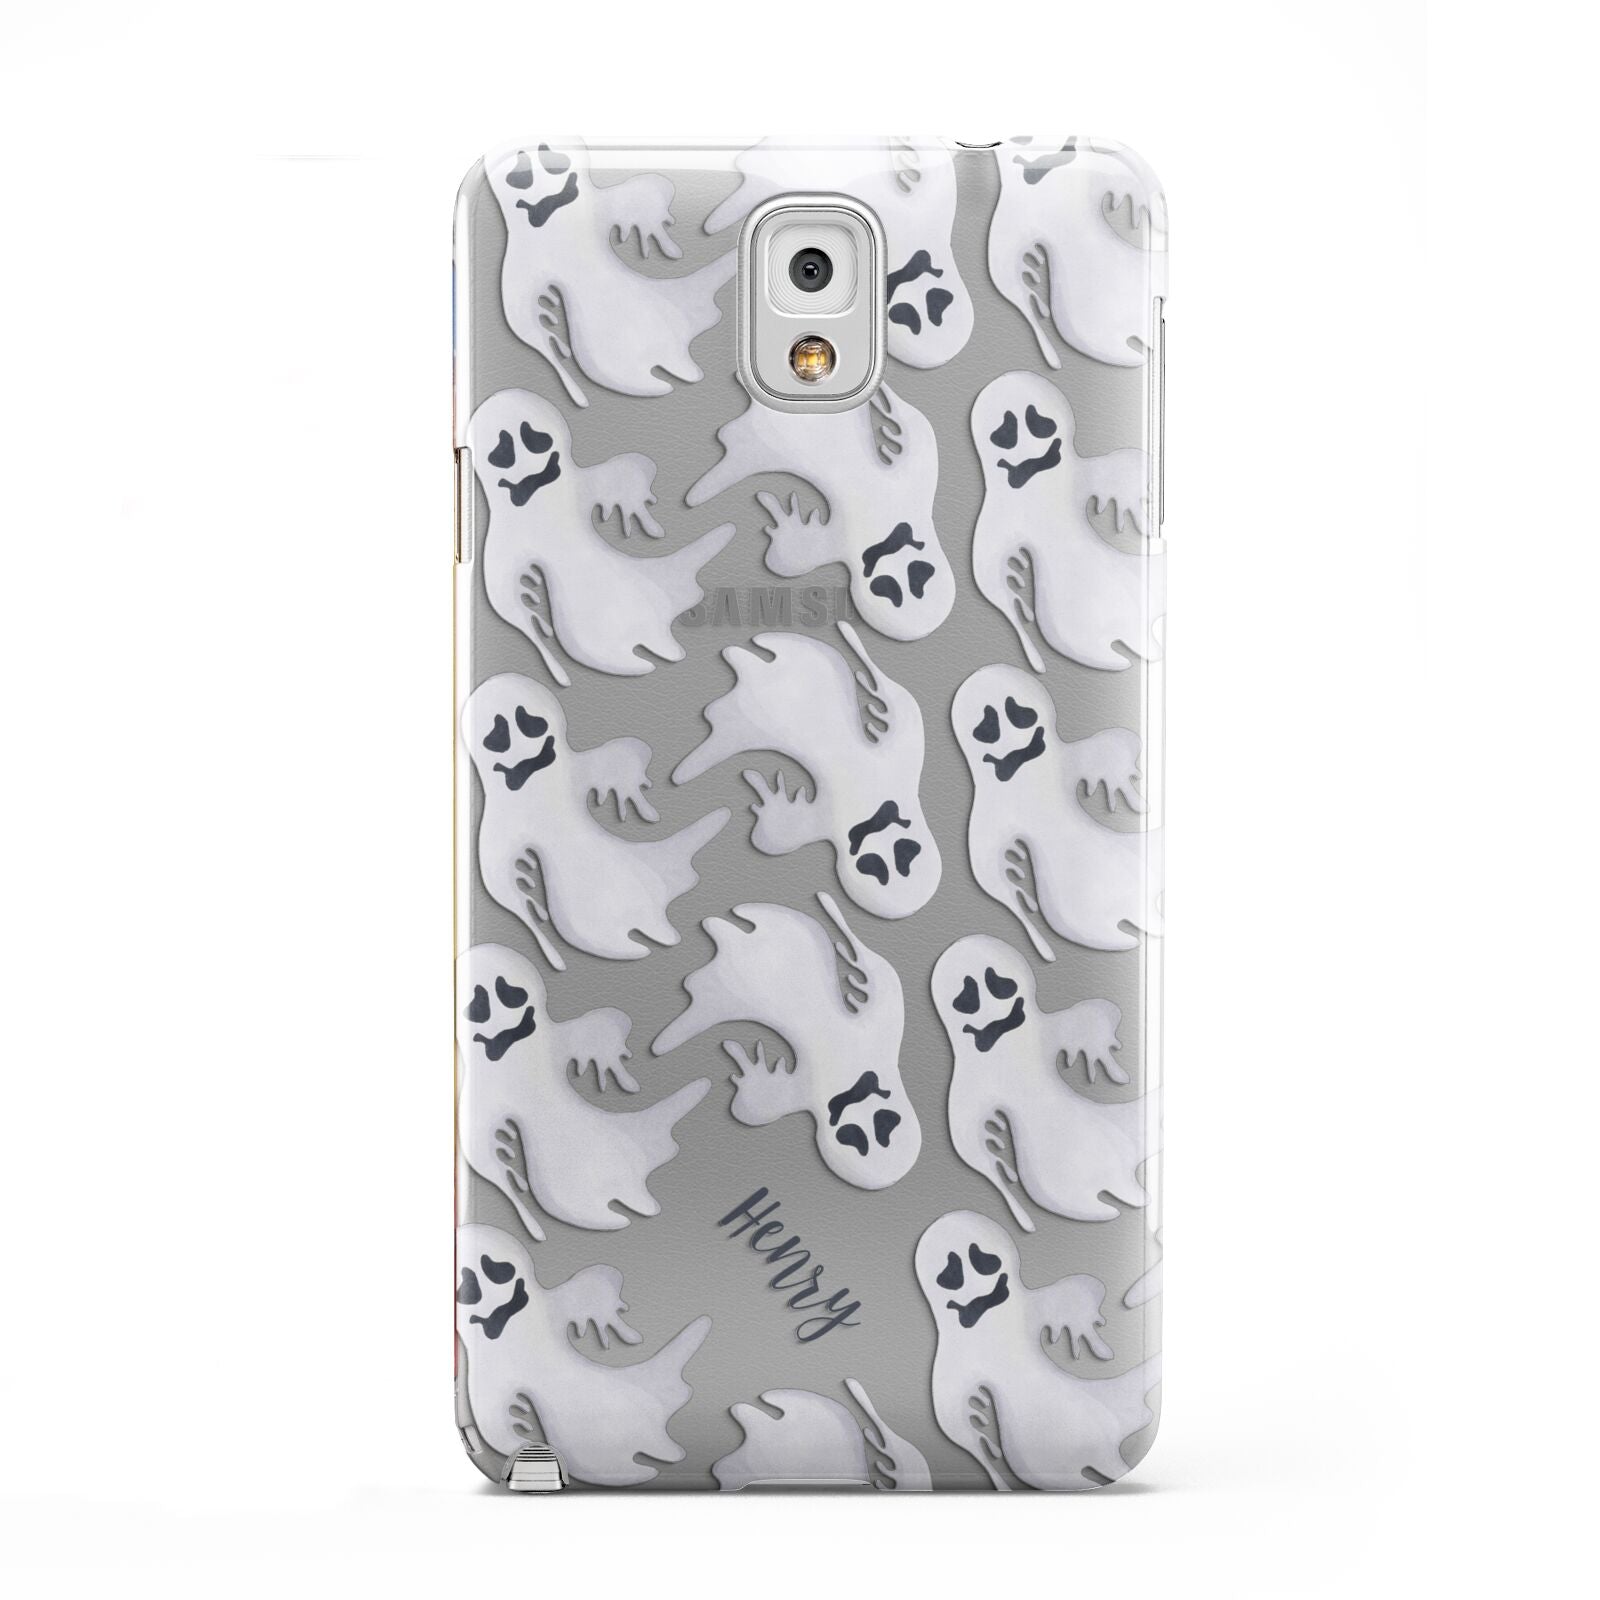 Floaty Ghosts Personalised Samsung Galaxy Note 3 Case